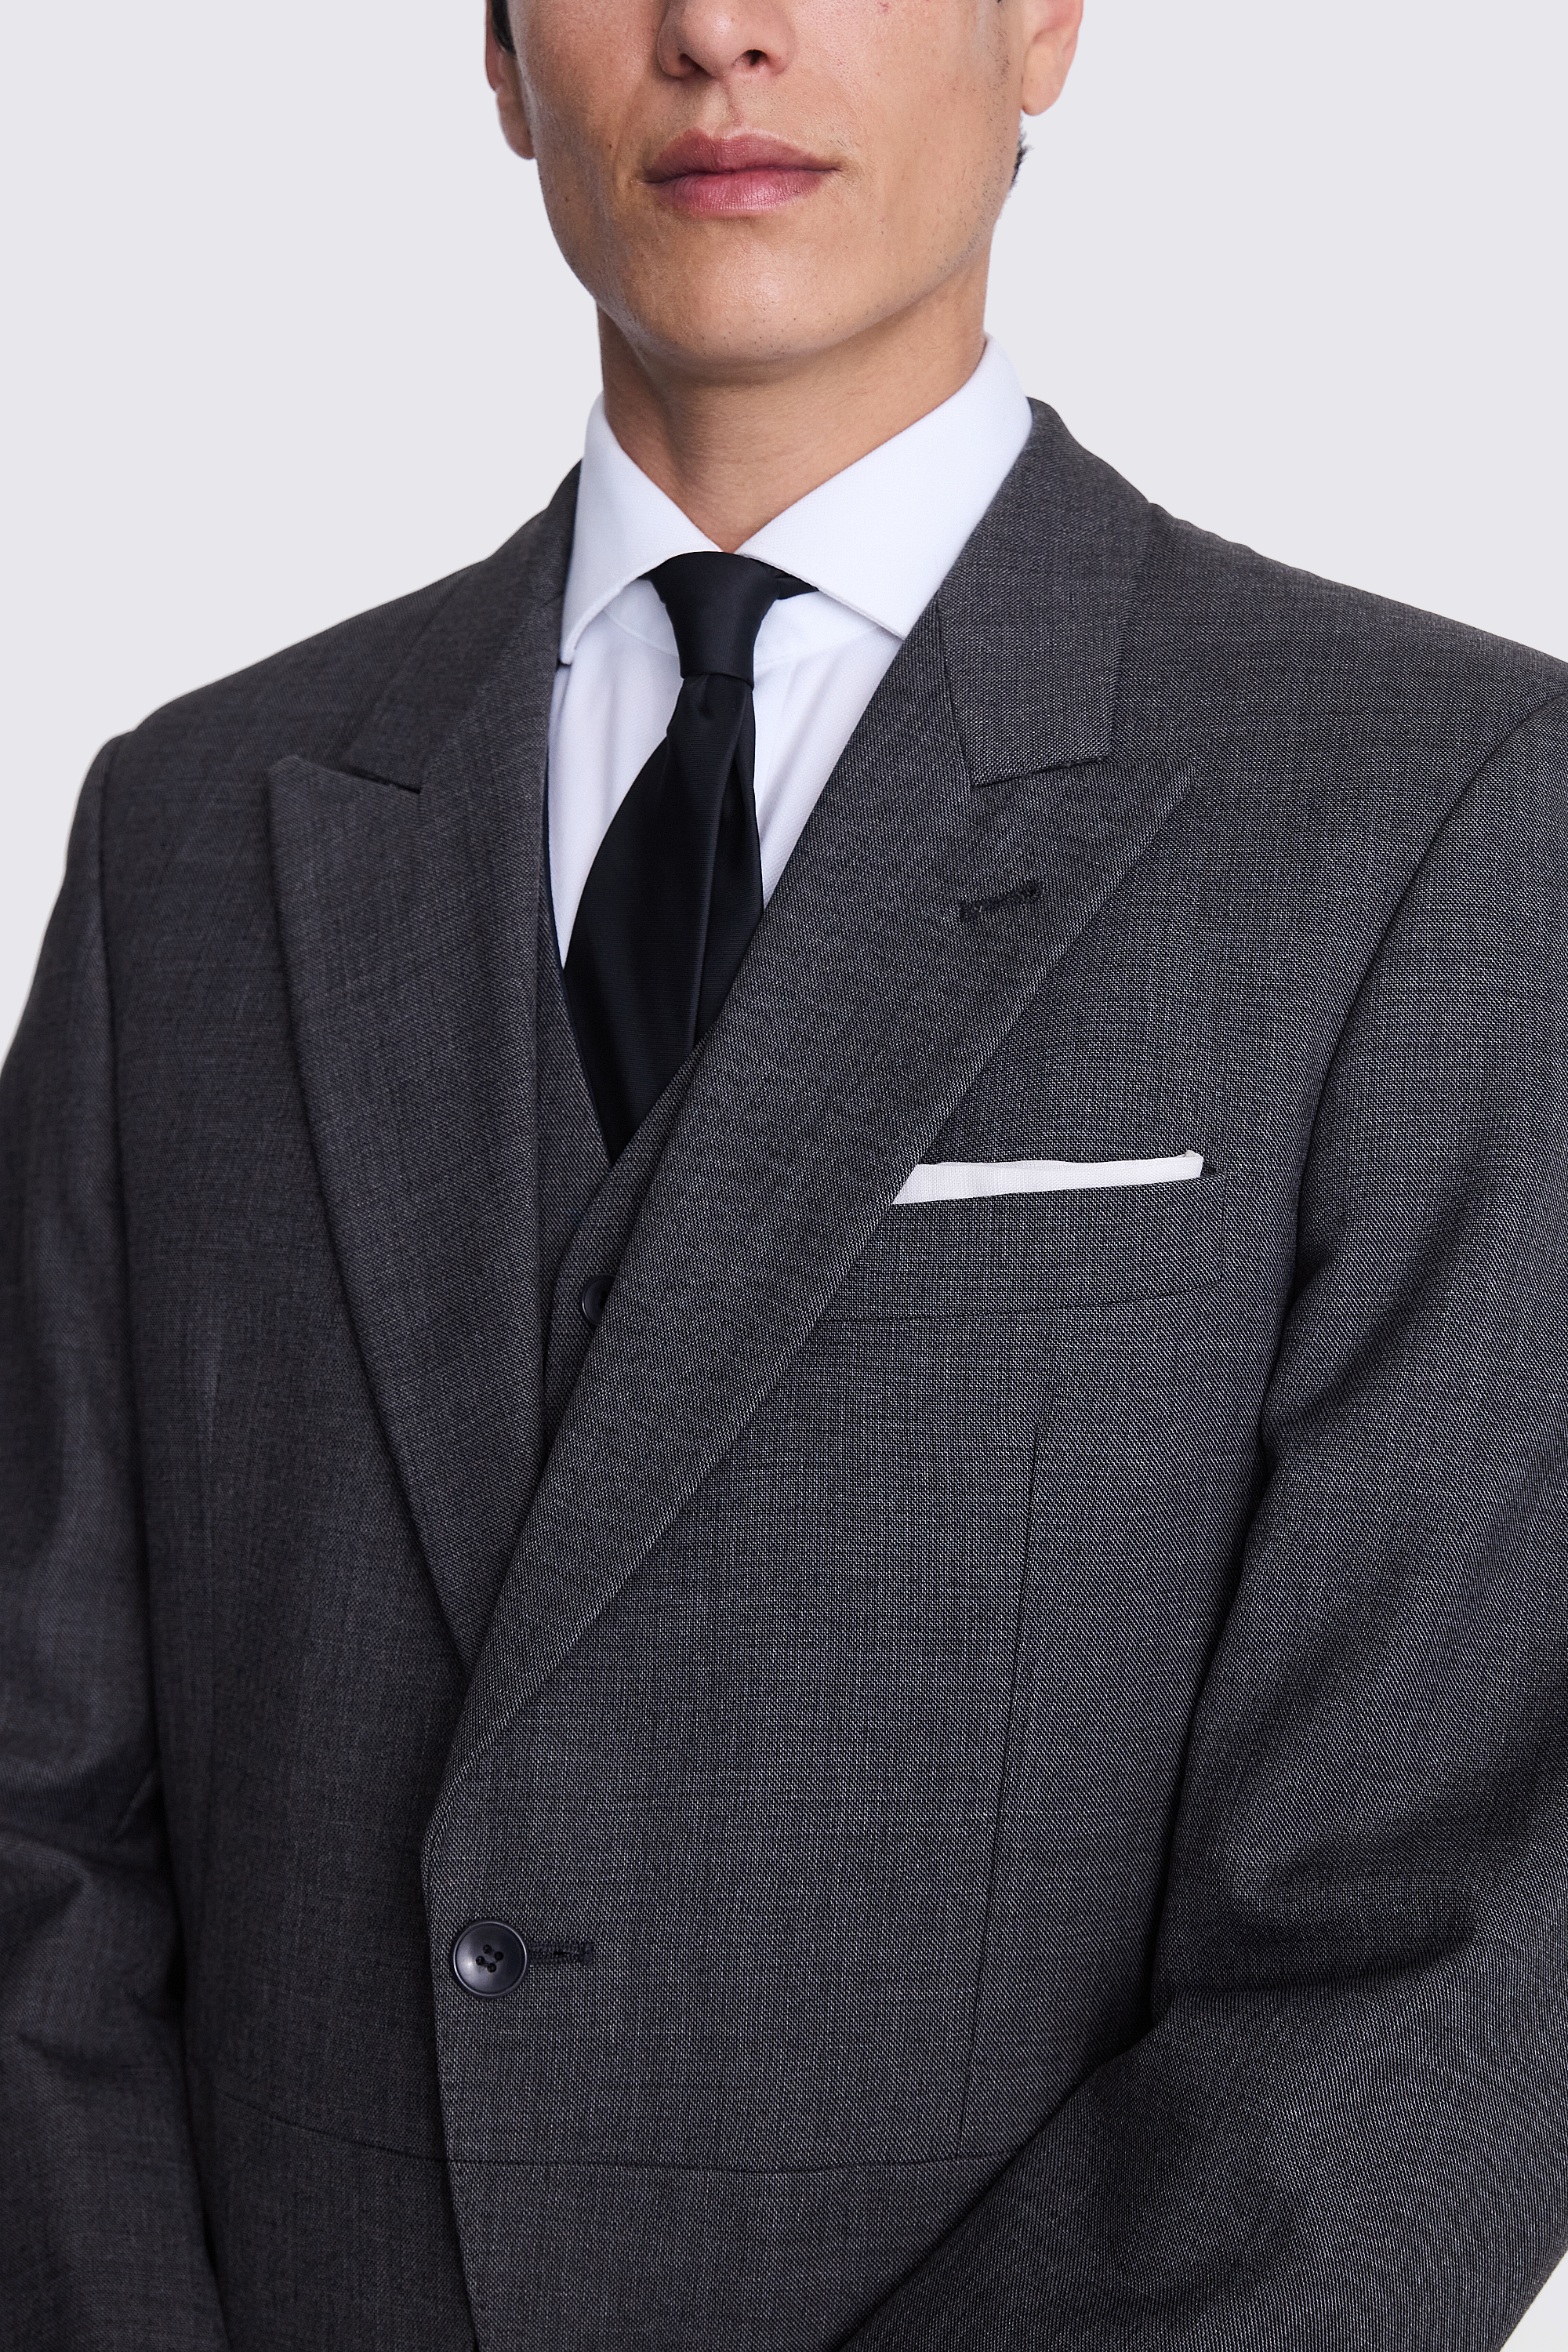 Lingfield Grey Hire Suit for Royal Ascot | Moss Bros Hire